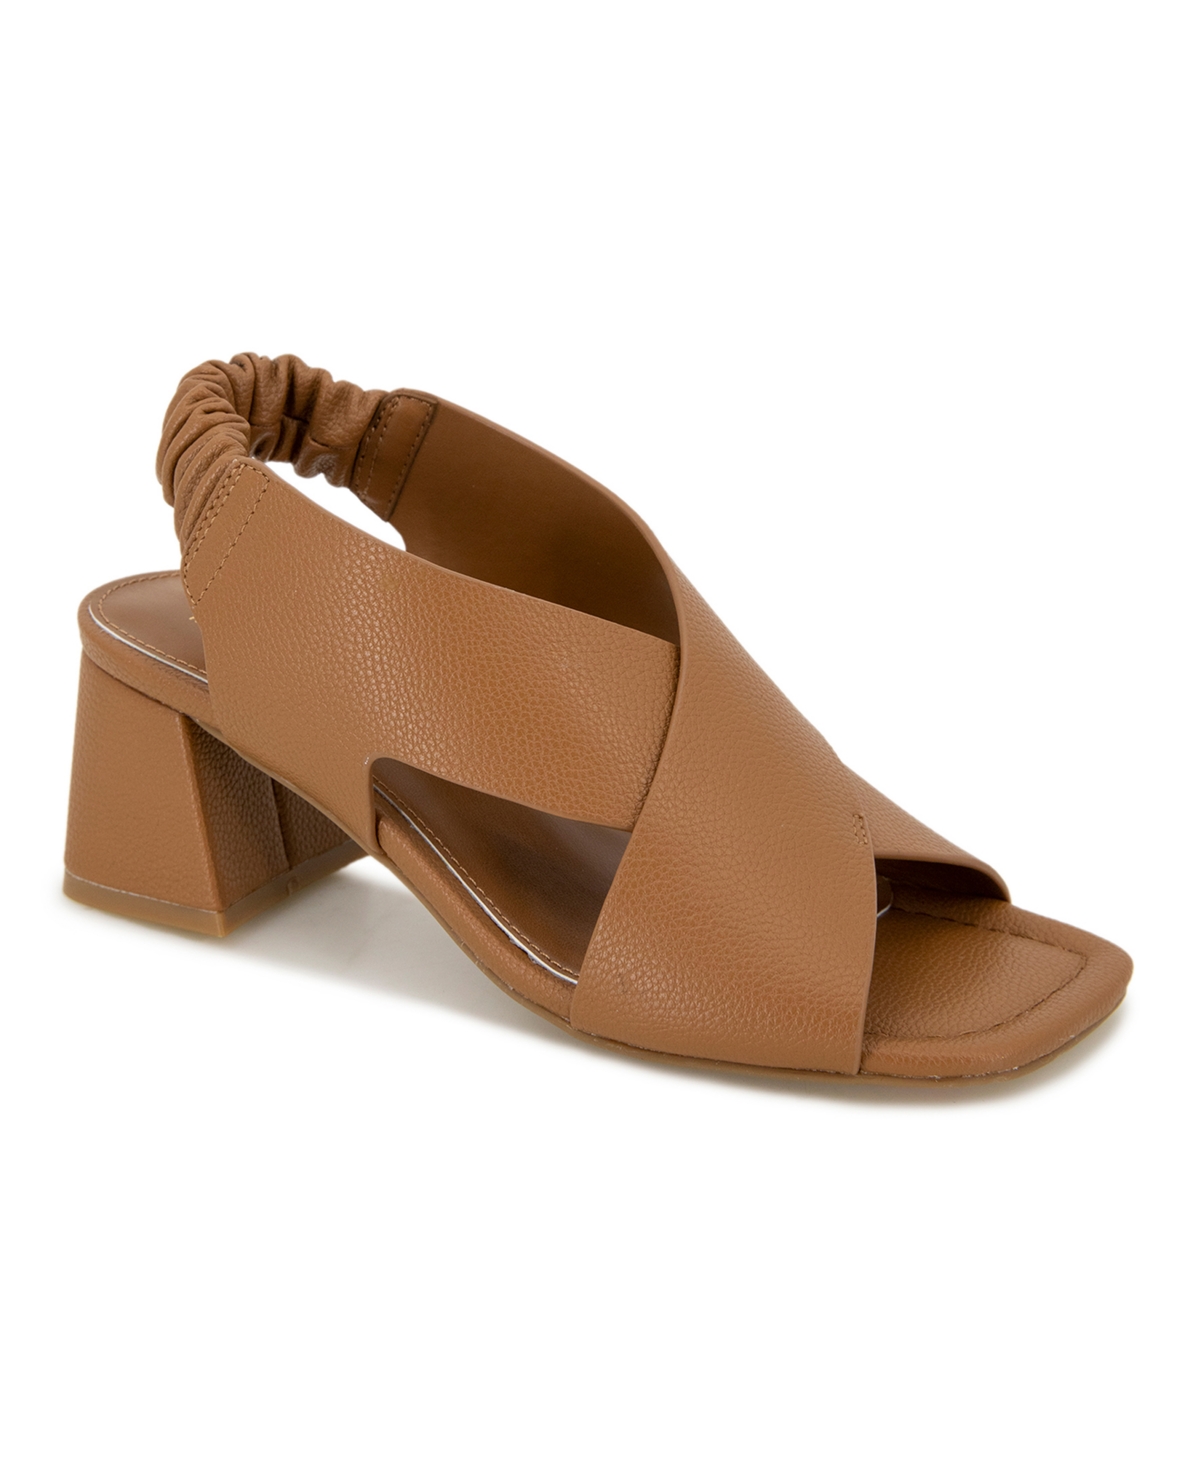 Kenneth Cole Reaction Women's Nancy Square Toe Sandals In Camel